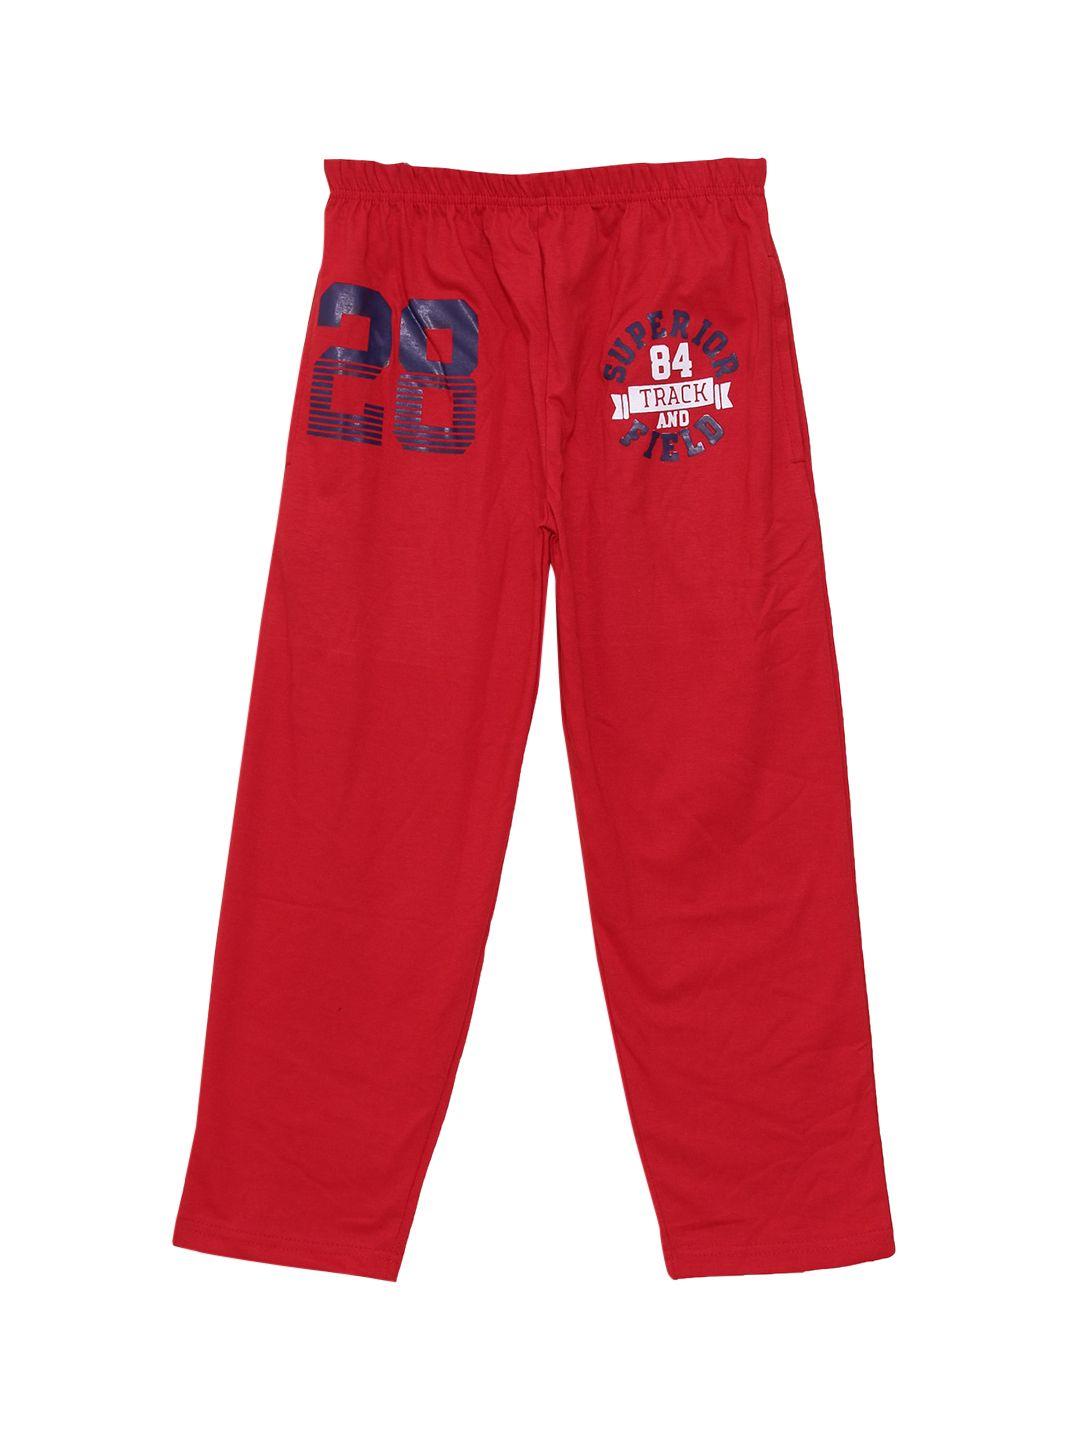 fashionable boys red printed pure cotton track pants